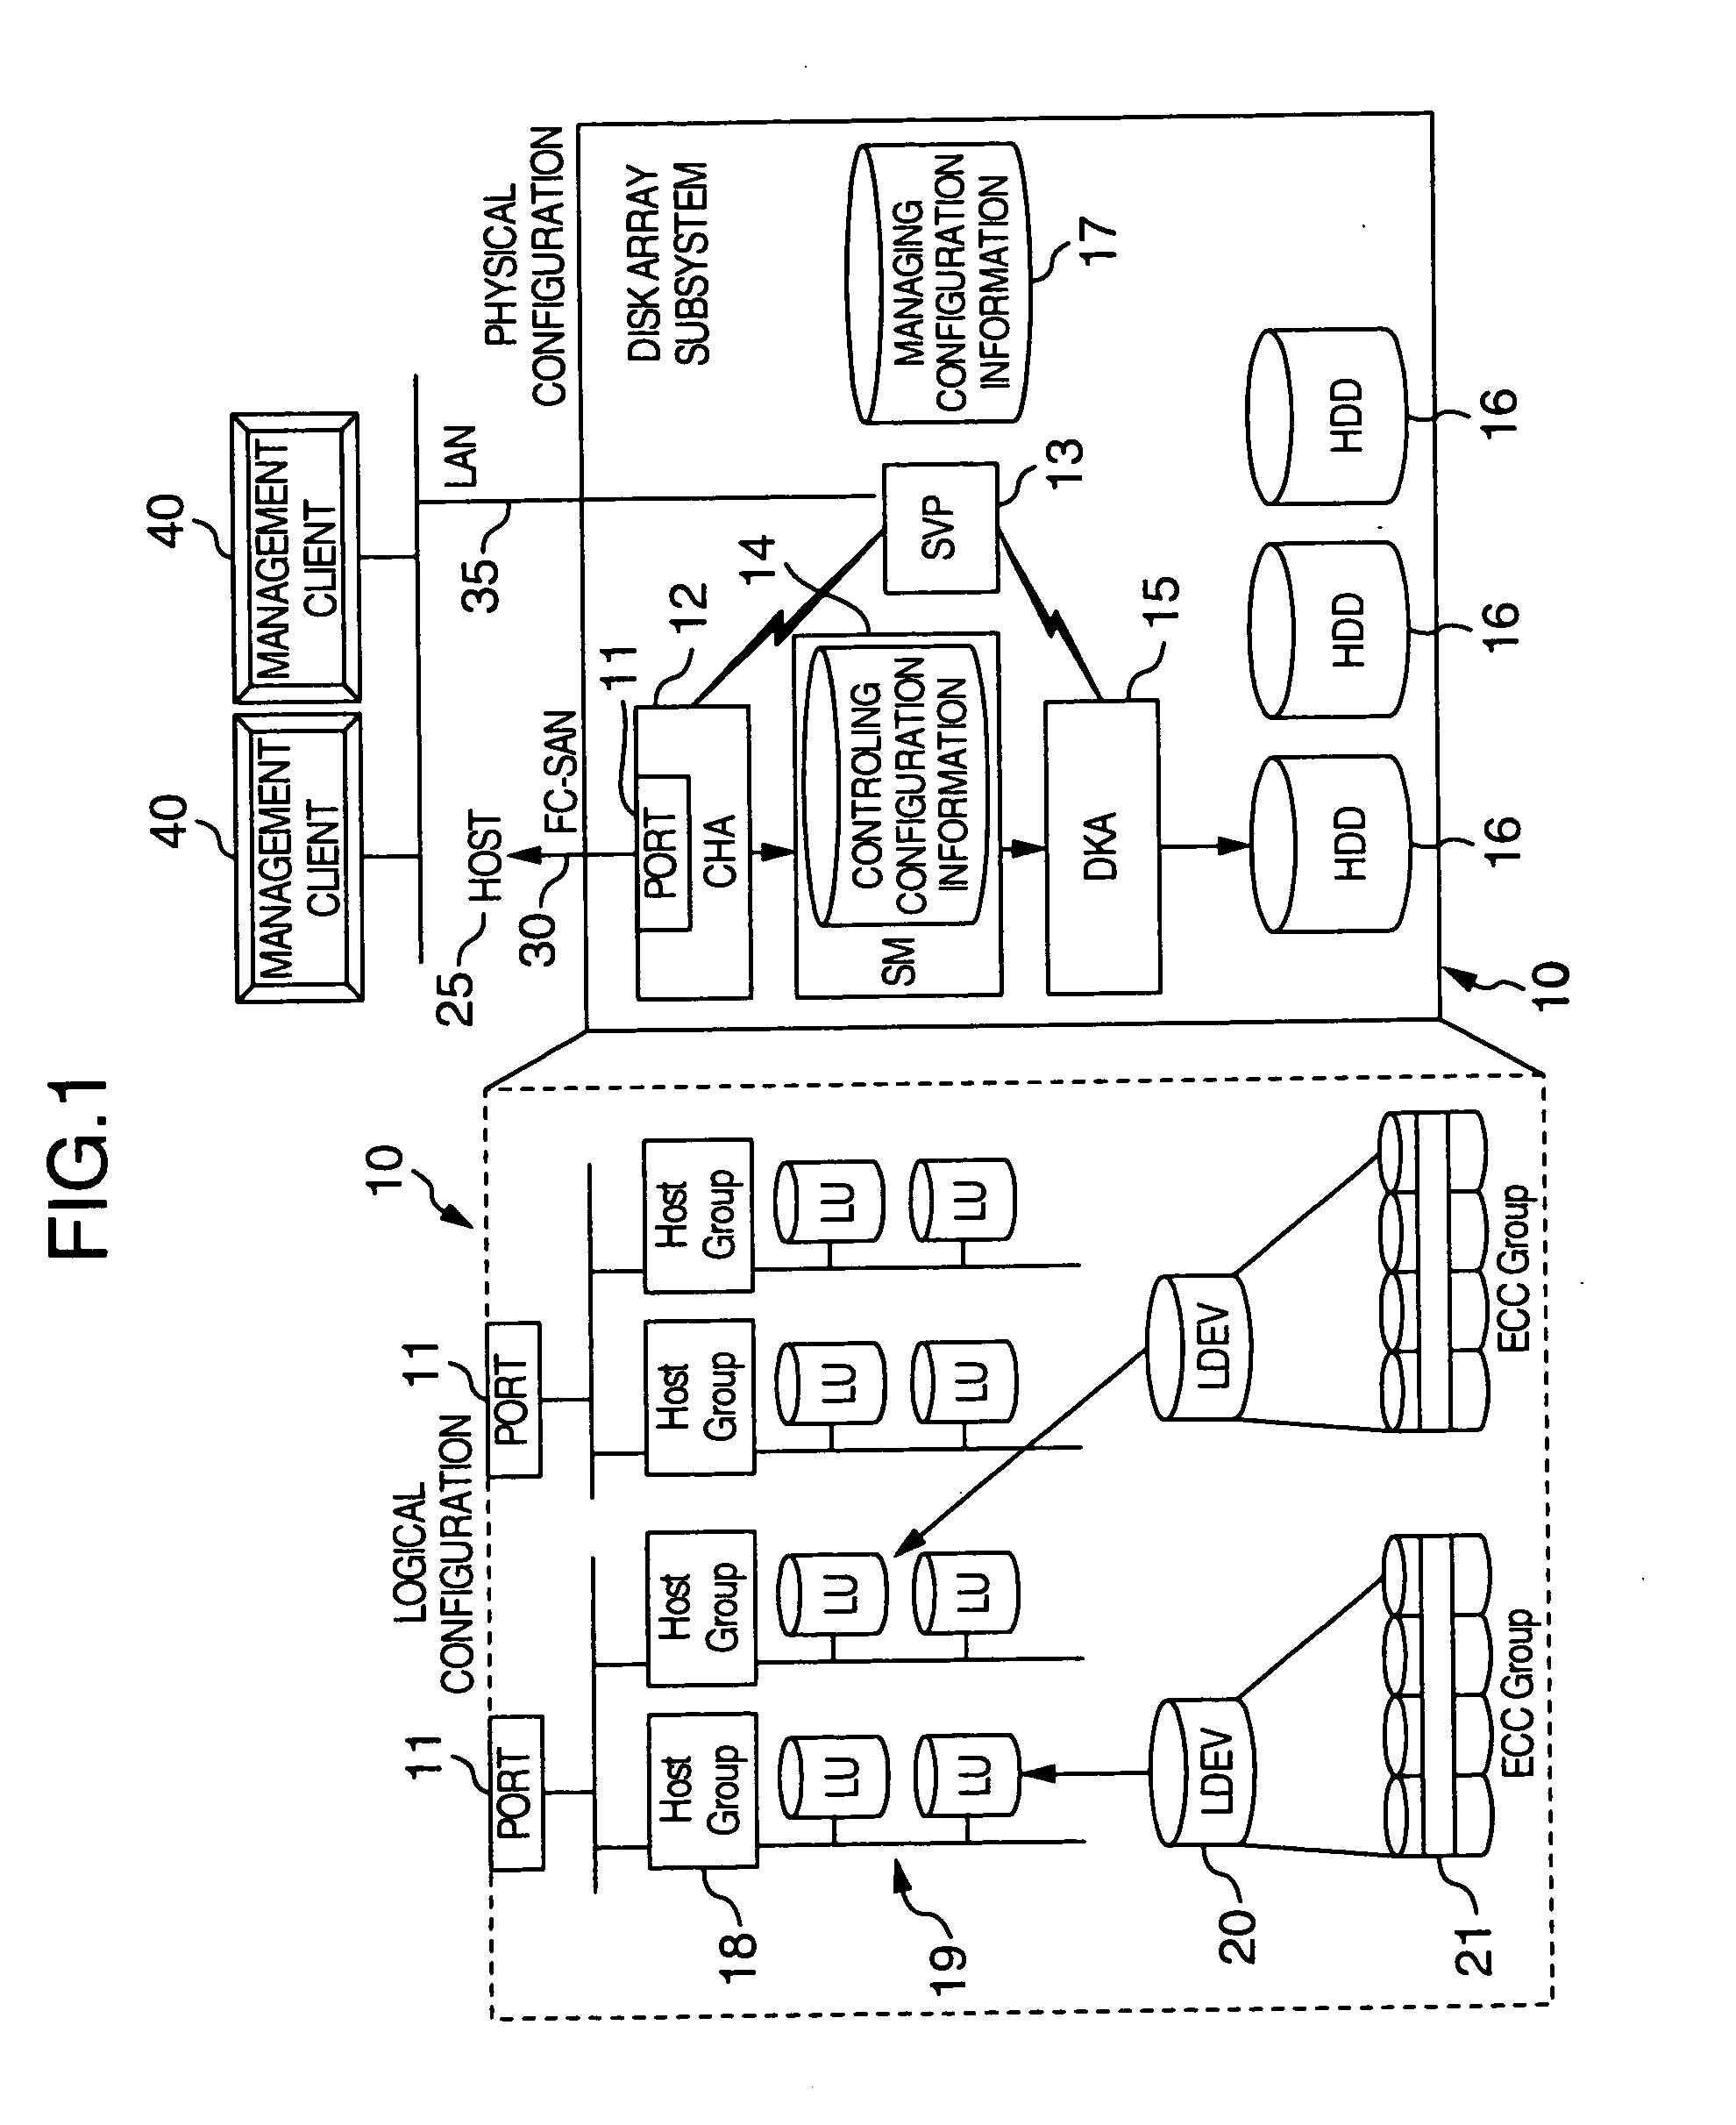 Apparatus and method for partitioning and managing subsystem logics